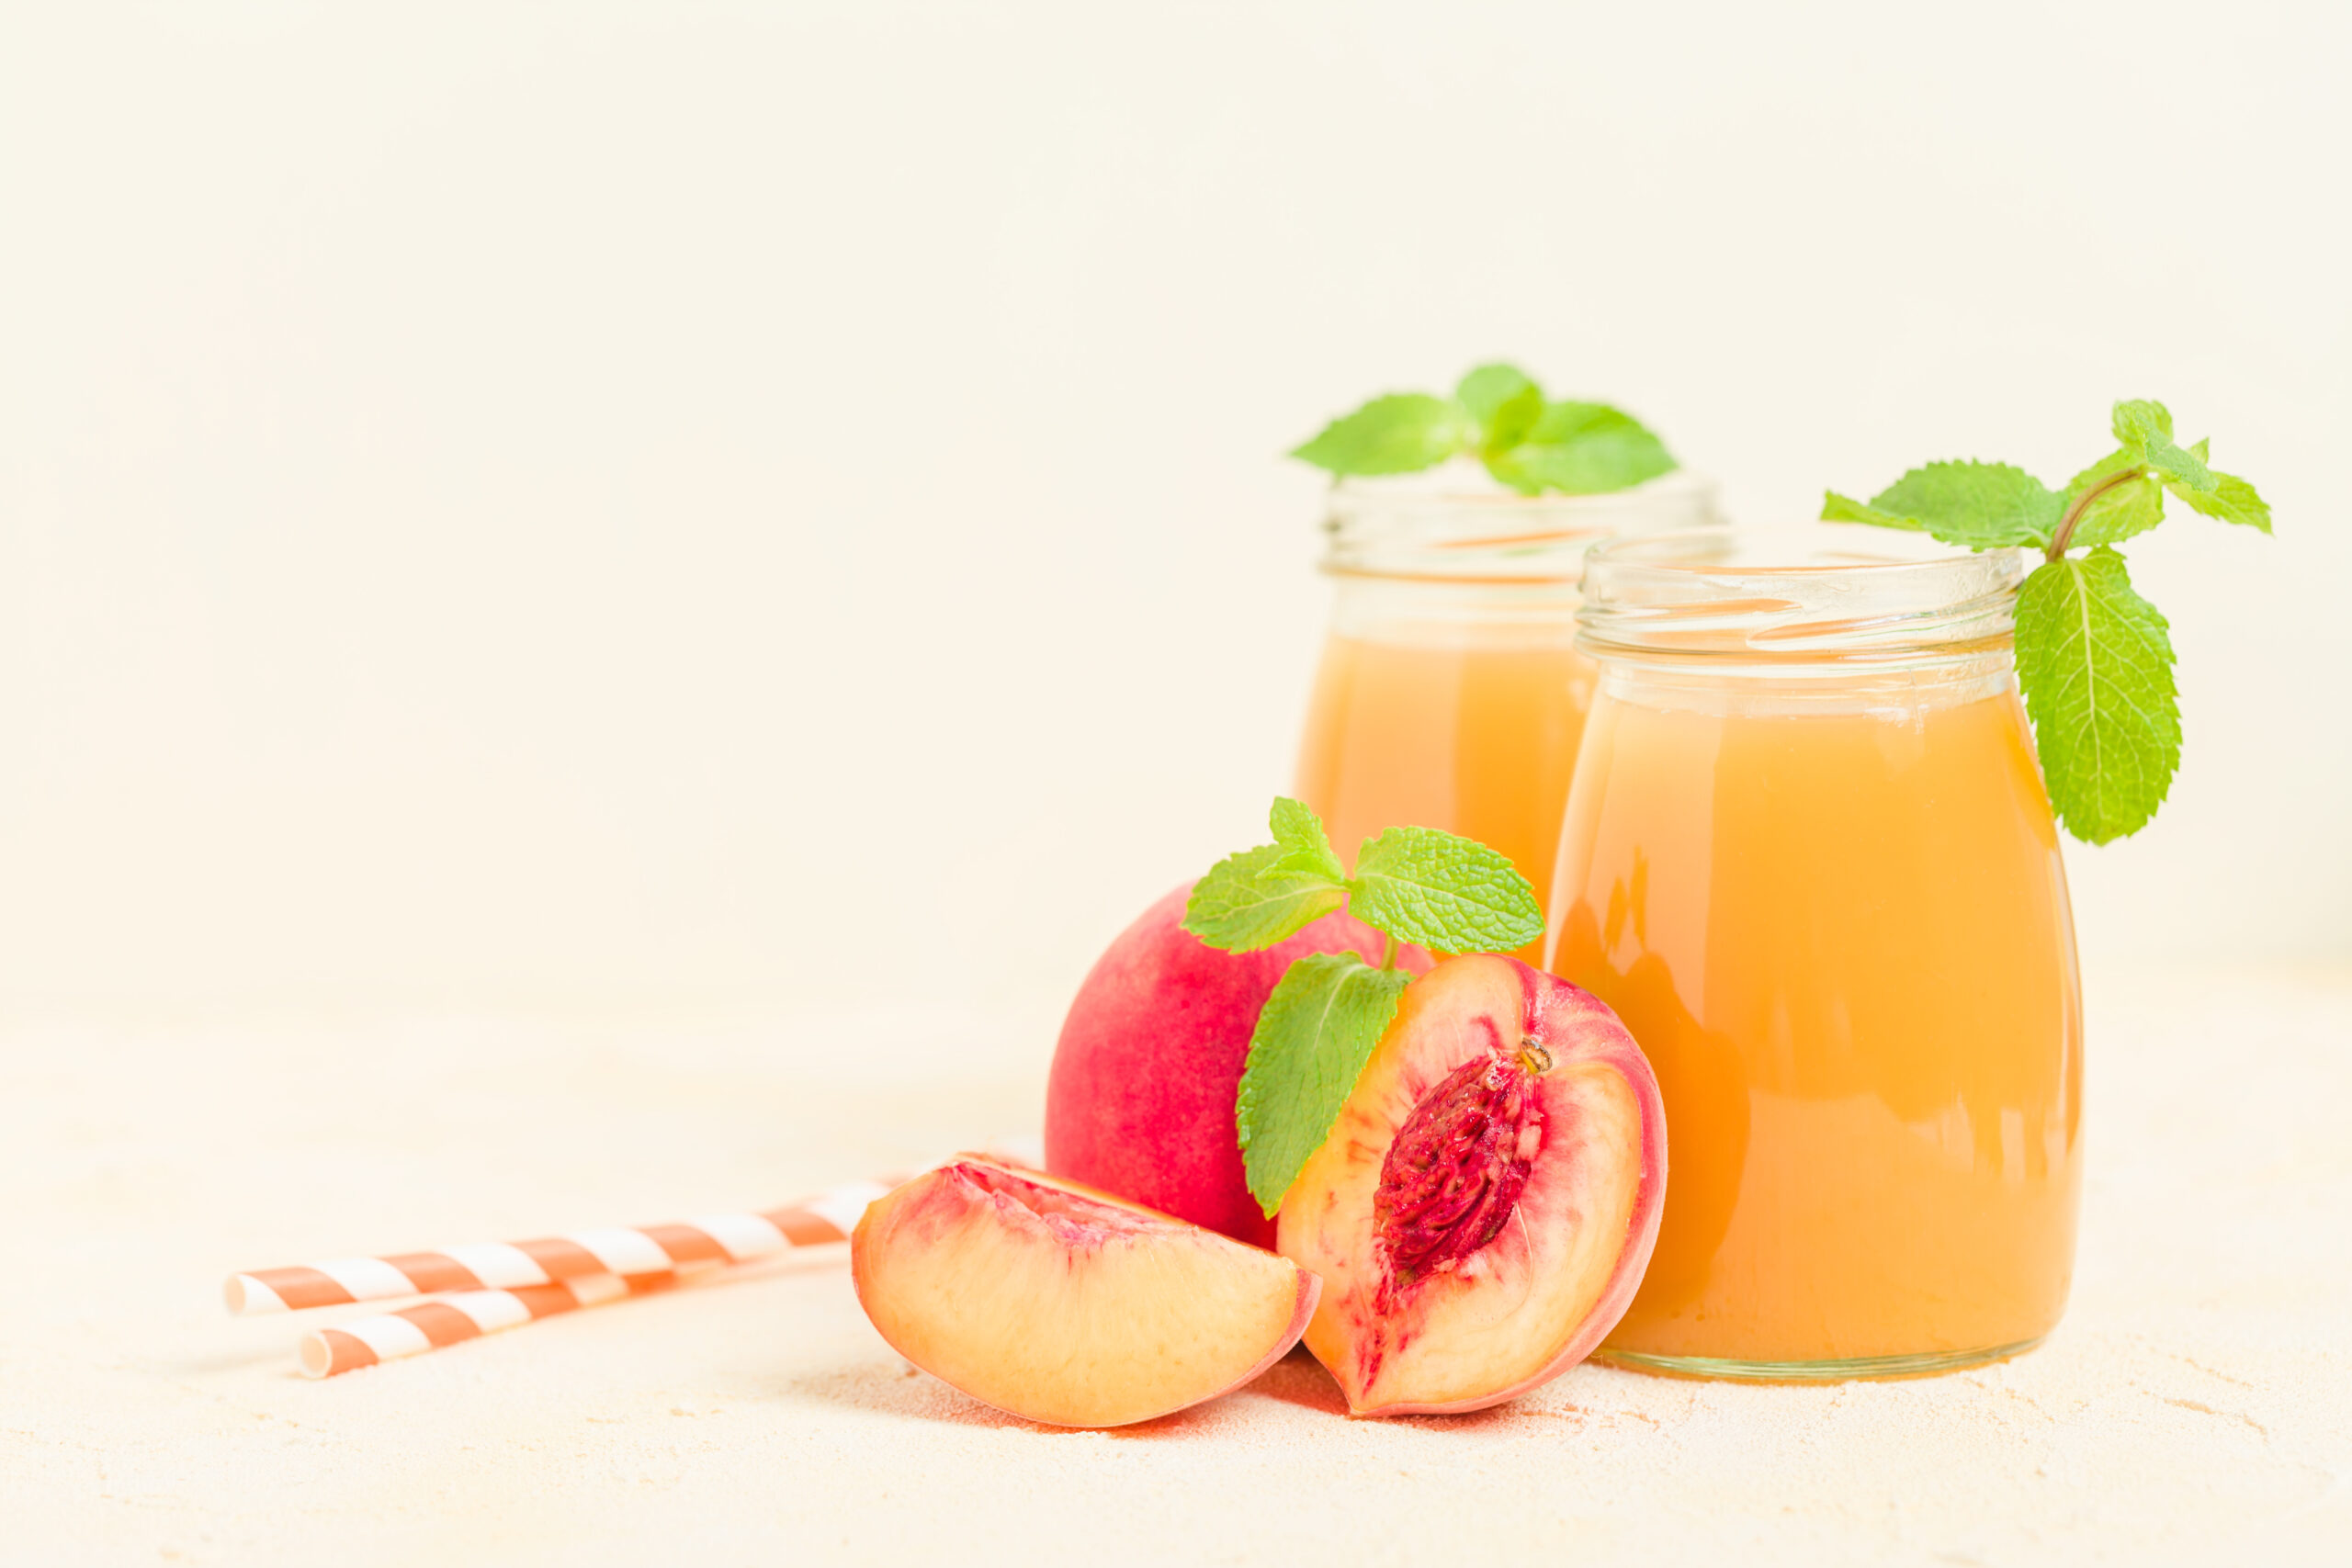 Peach and kefir smoothie recipe, a sweet snack to take care of your health.